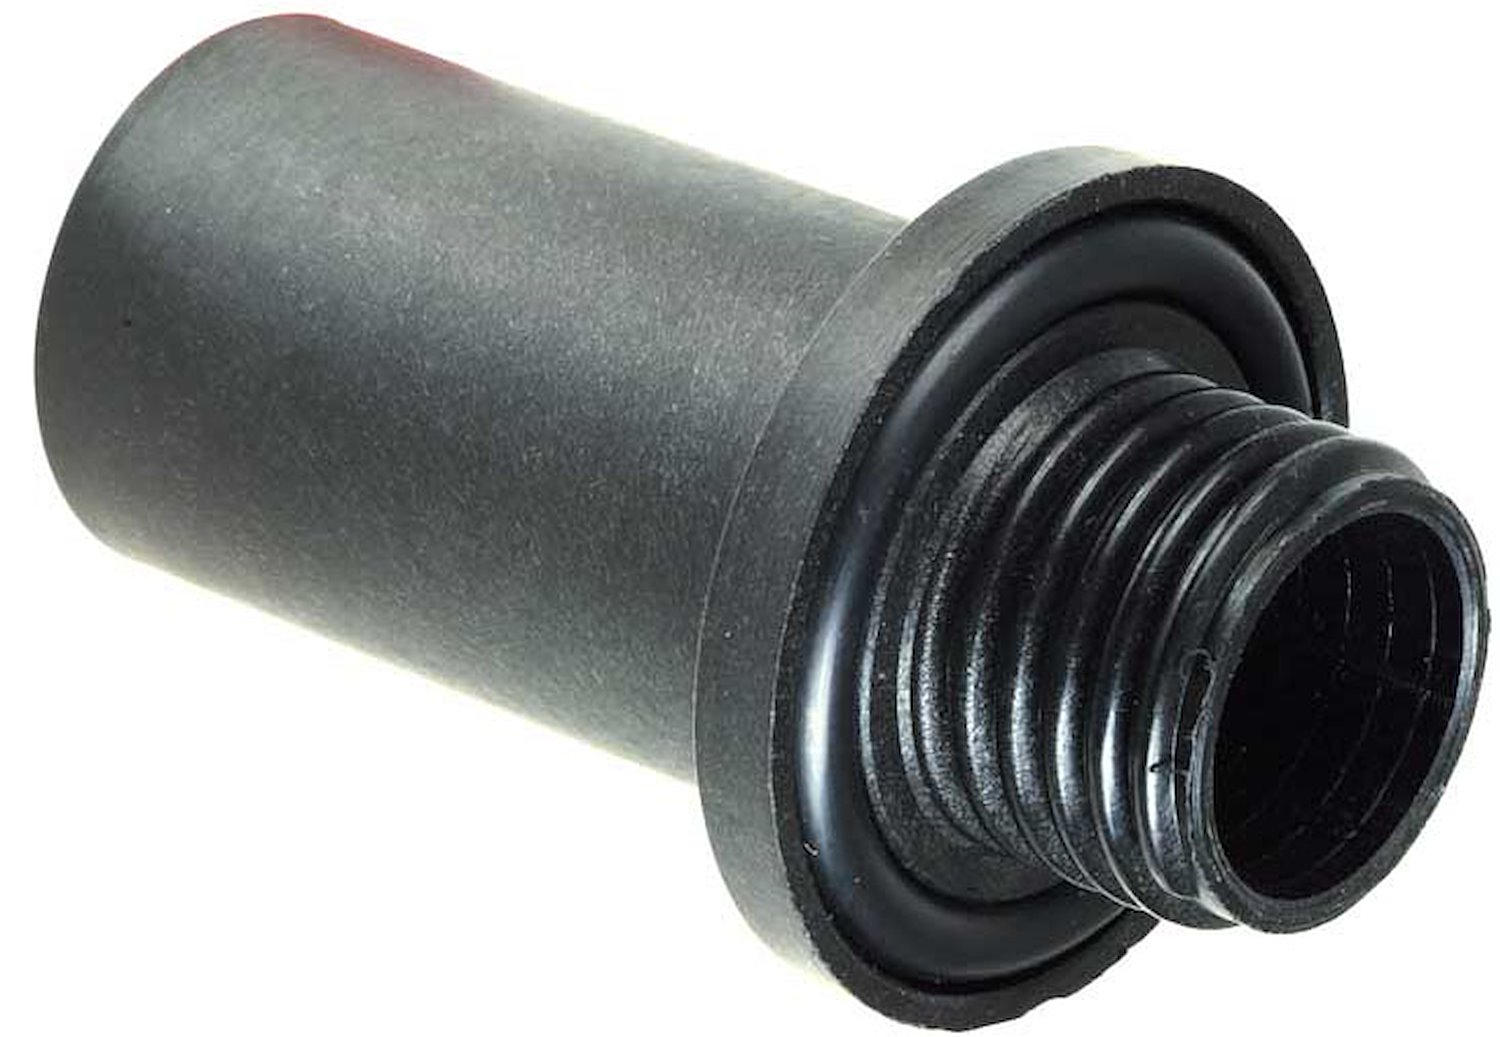 Plastic Vent Adapter Screw-in Style for Ford Valve Covers, 3.625" H x 1.5" W x 3.625" L Use with 1-1/2" Flanged Filter